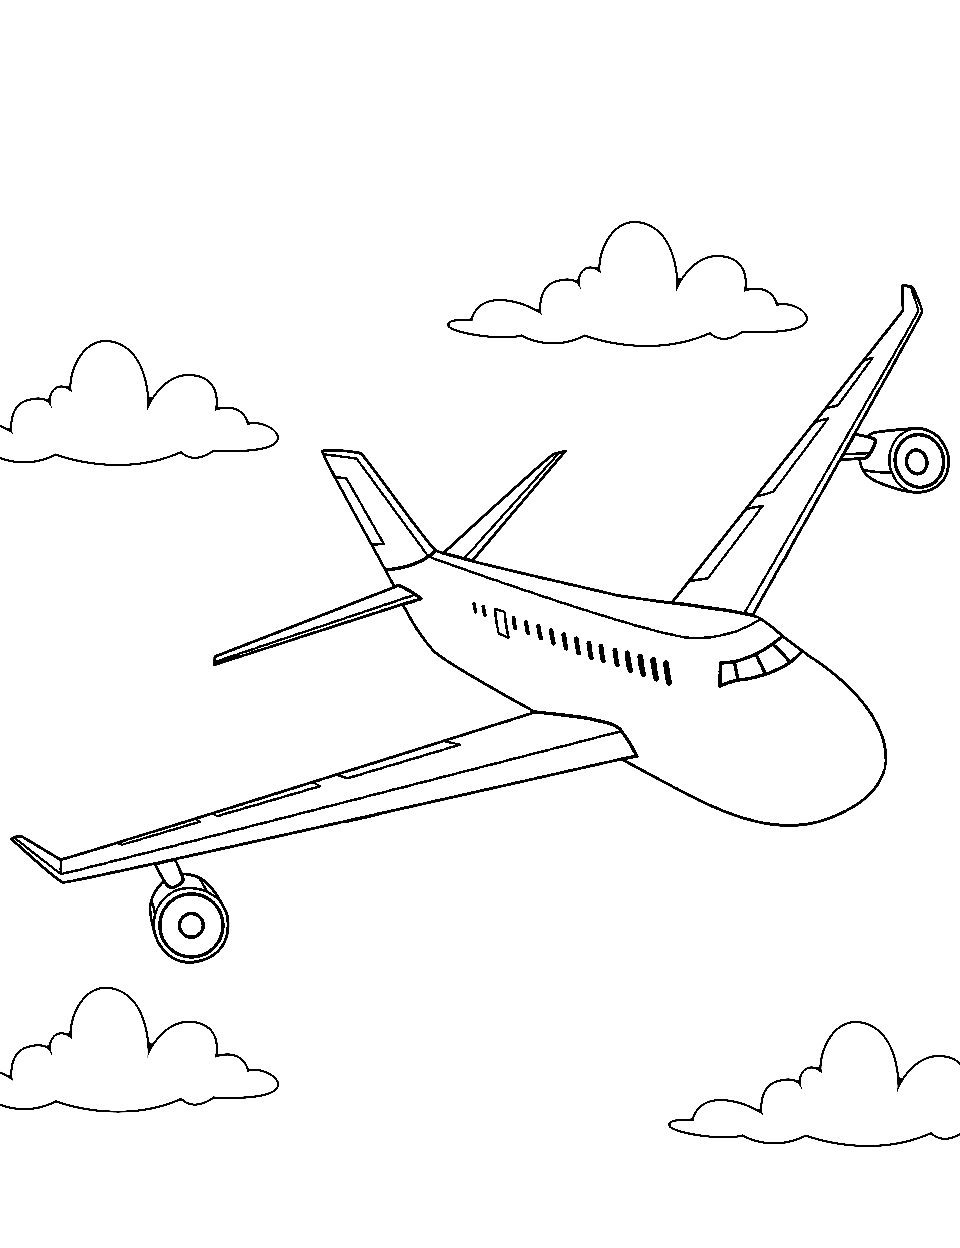 Electric Airplane Coloring Page - A futuristic electric airplane with a sleek design.